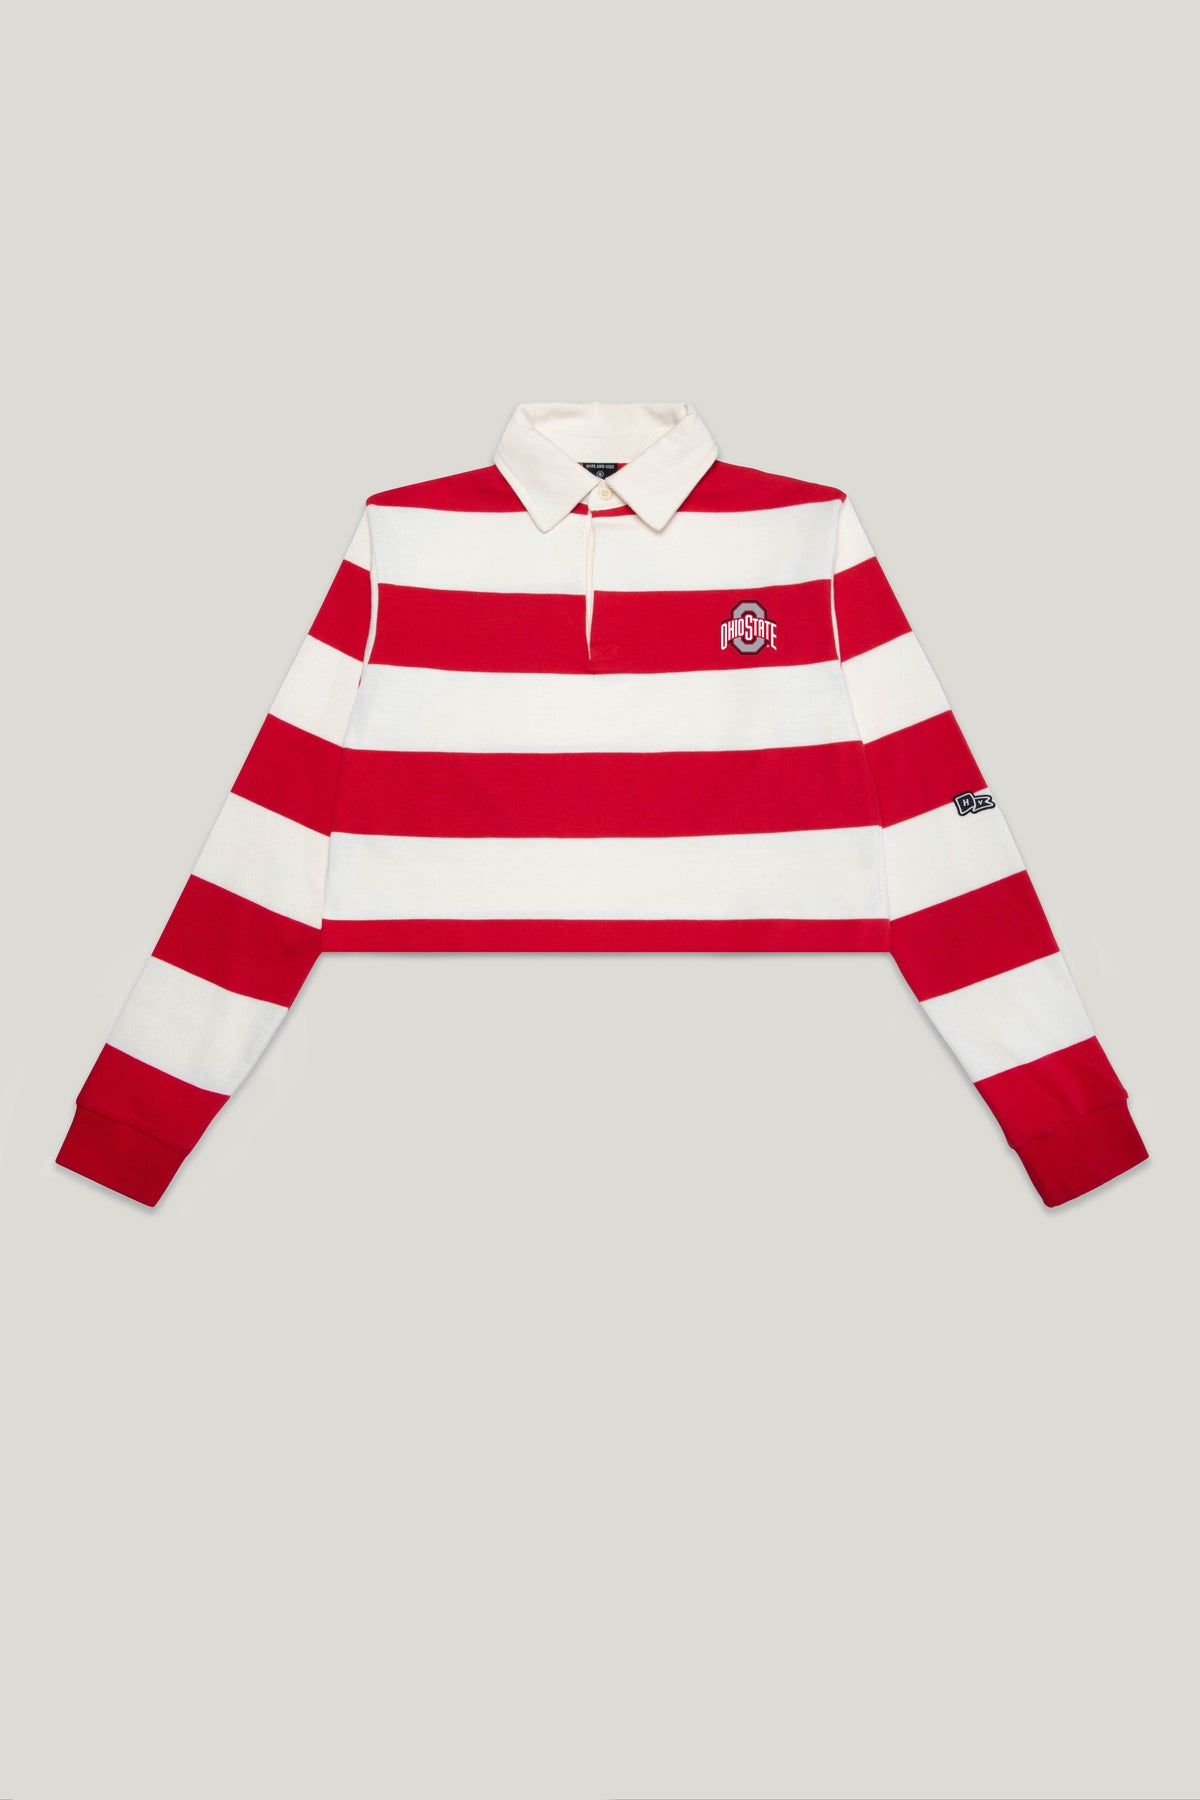 Ohio State Rugby Top